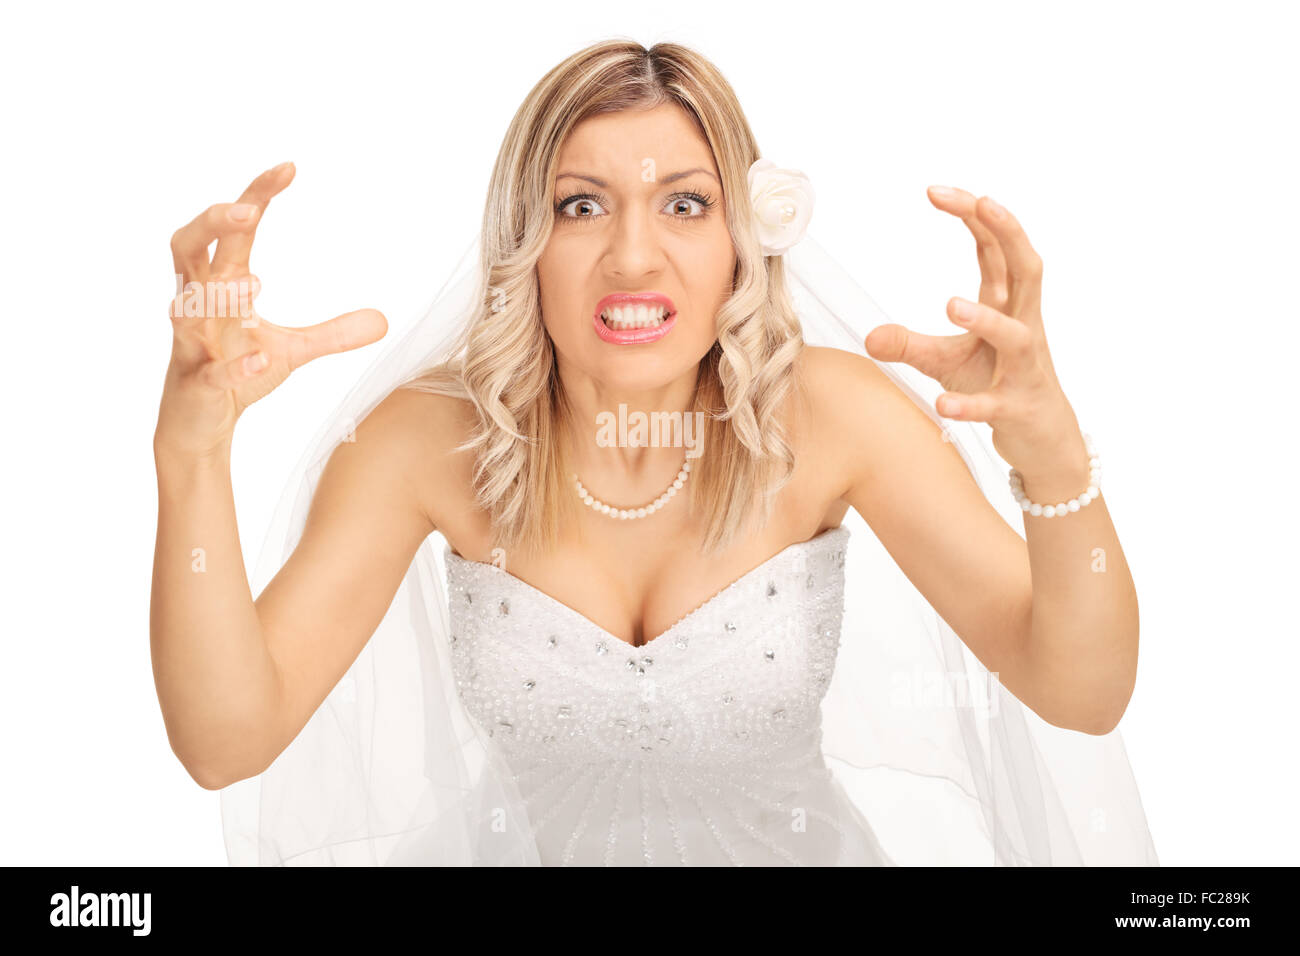 Angry bride threatening to strangle someone and looking at the camera isolated on white background Stock Photo